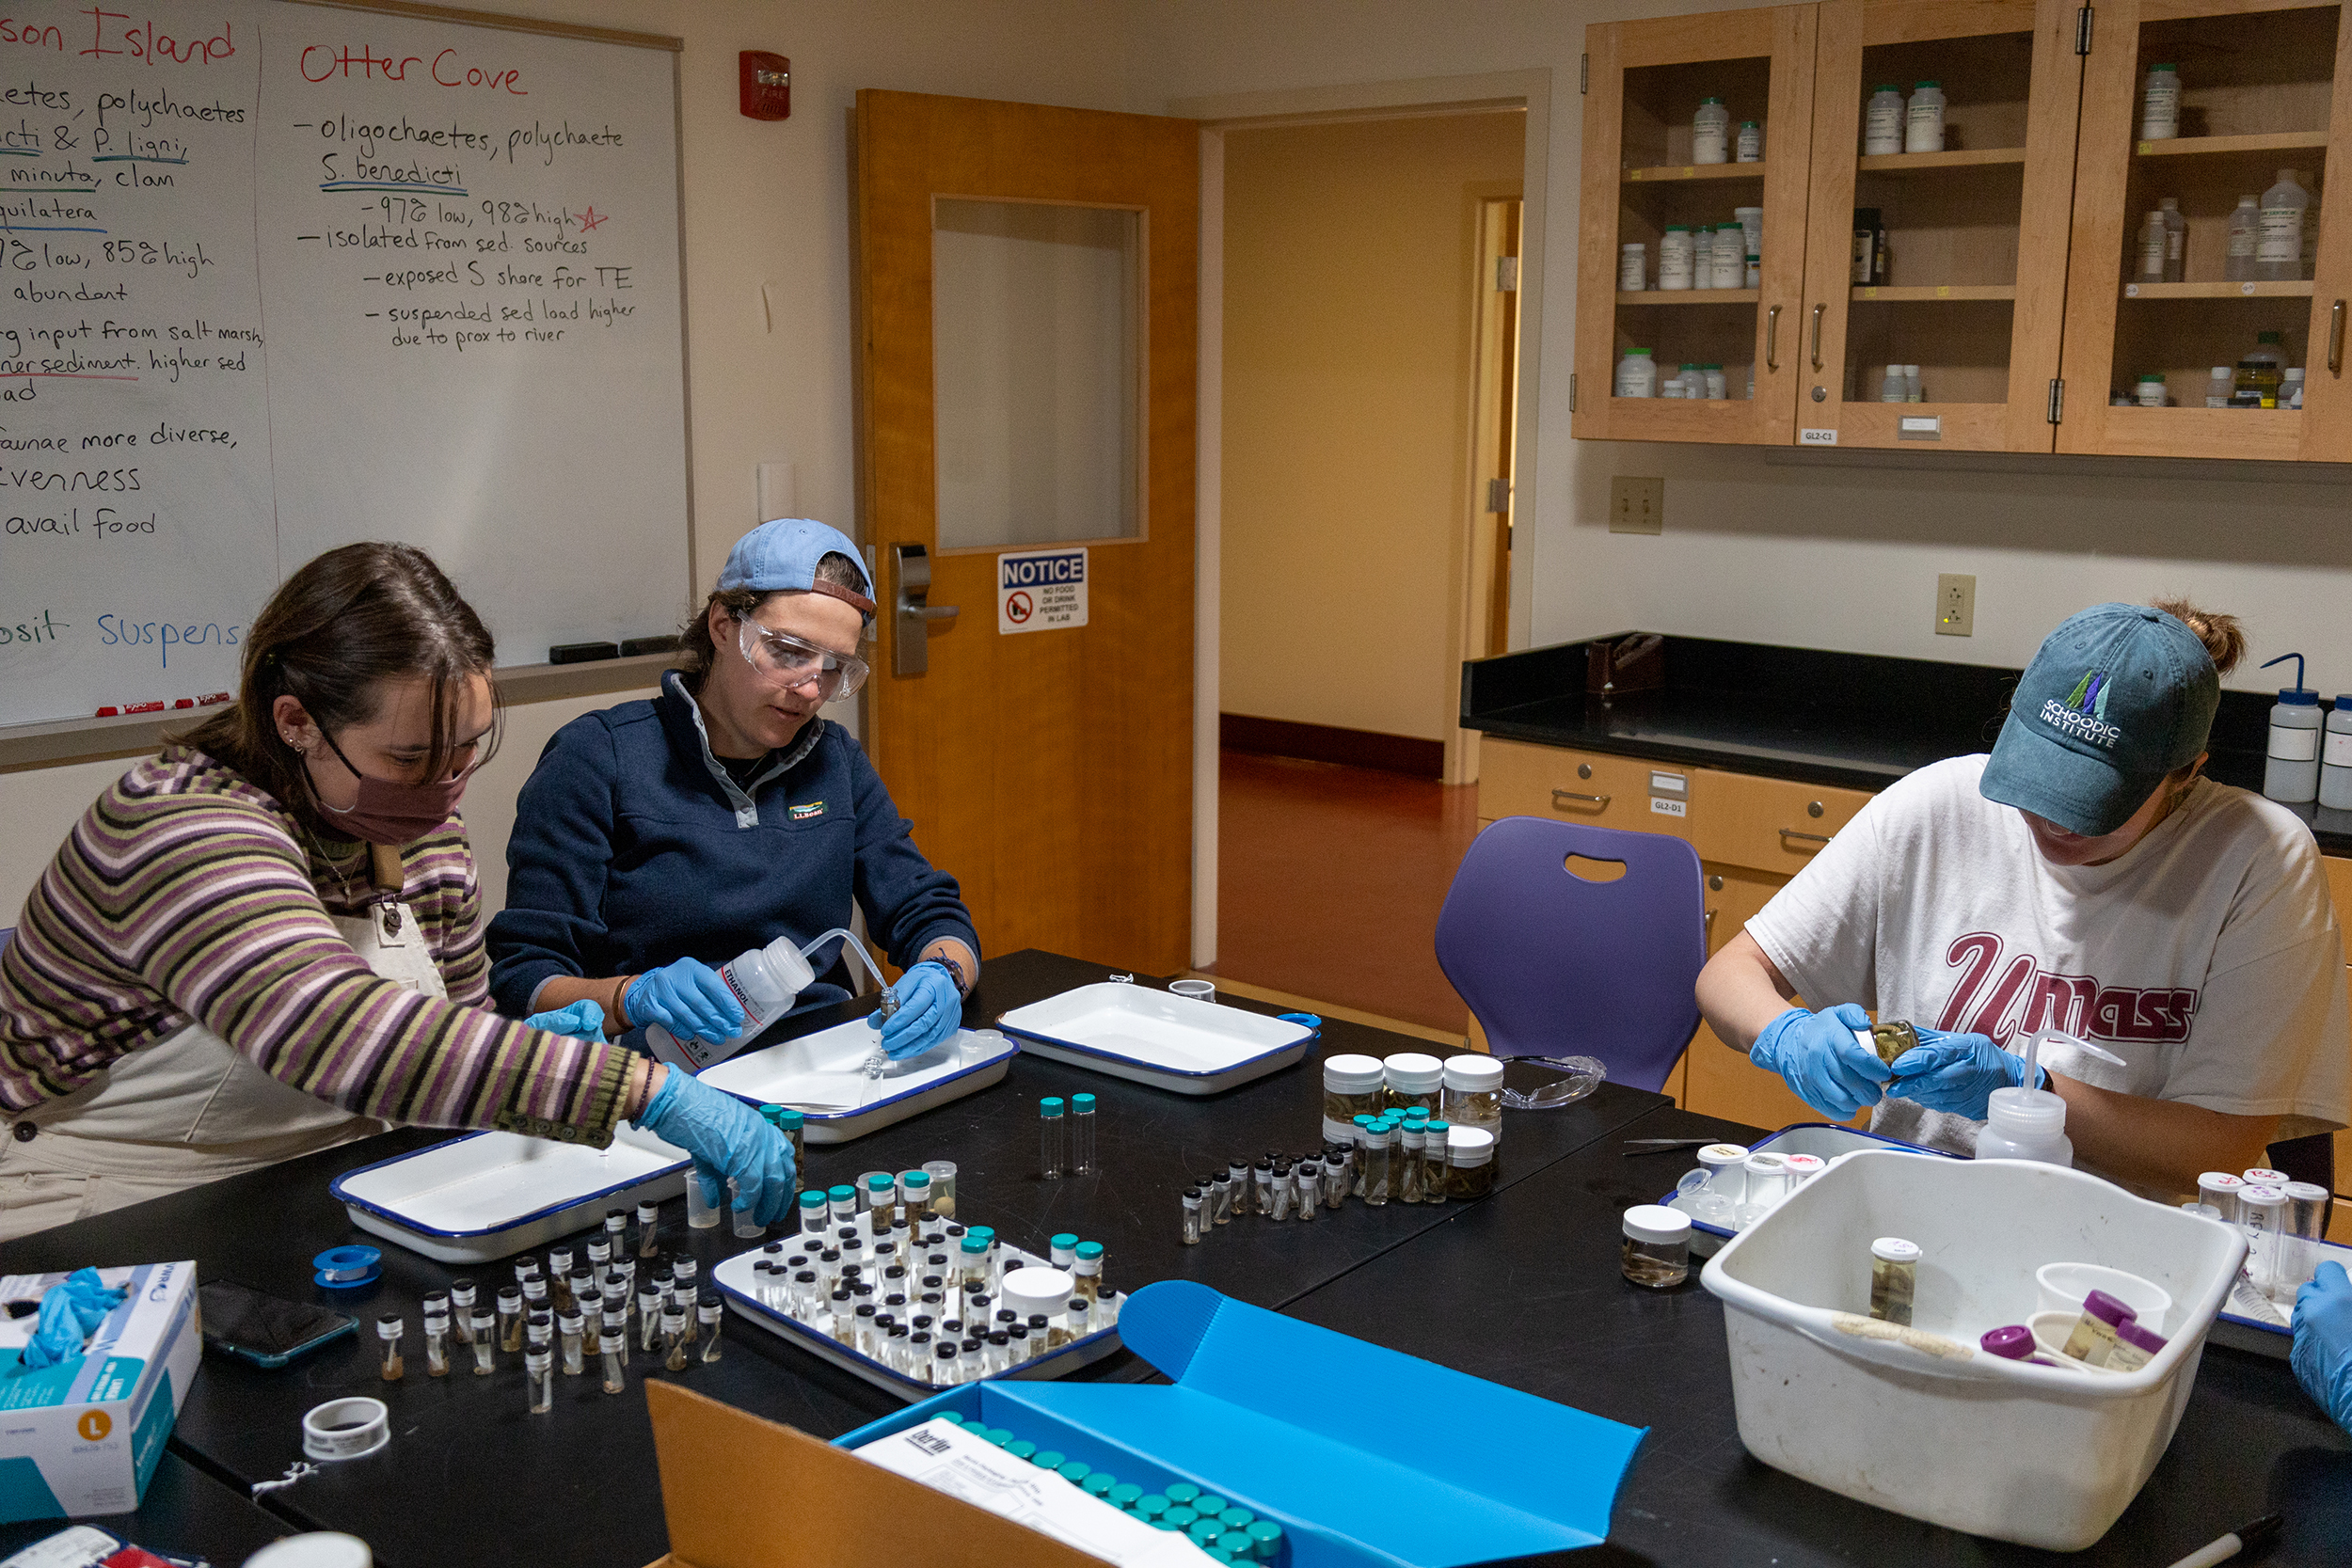 A group of people work in a science lab, collecting and sorting samples